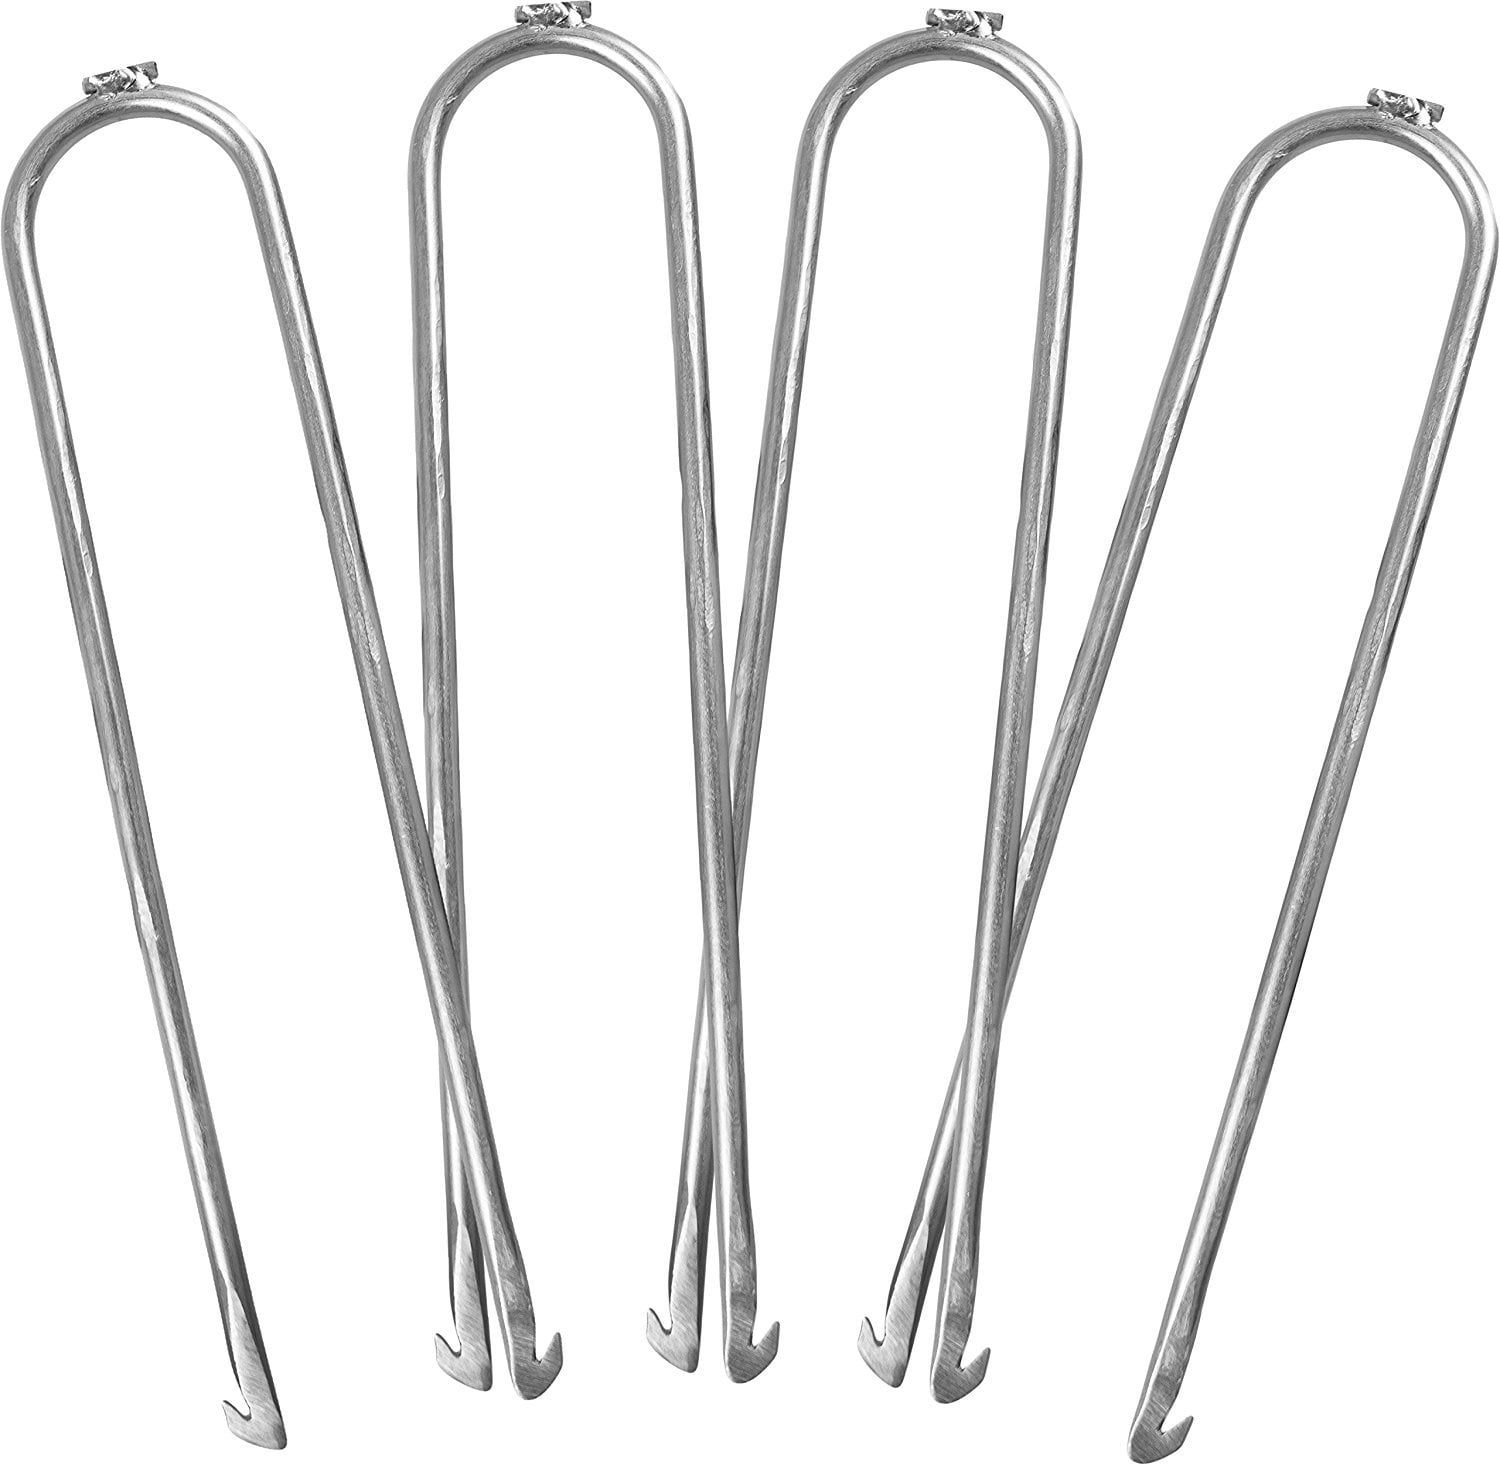 OK5STAR 8-Pack Trampoline Wind Stakes 16 Inch U Shaped Rebar Ground Stakes Galvanized Ground Anchors for Trampoline Security 